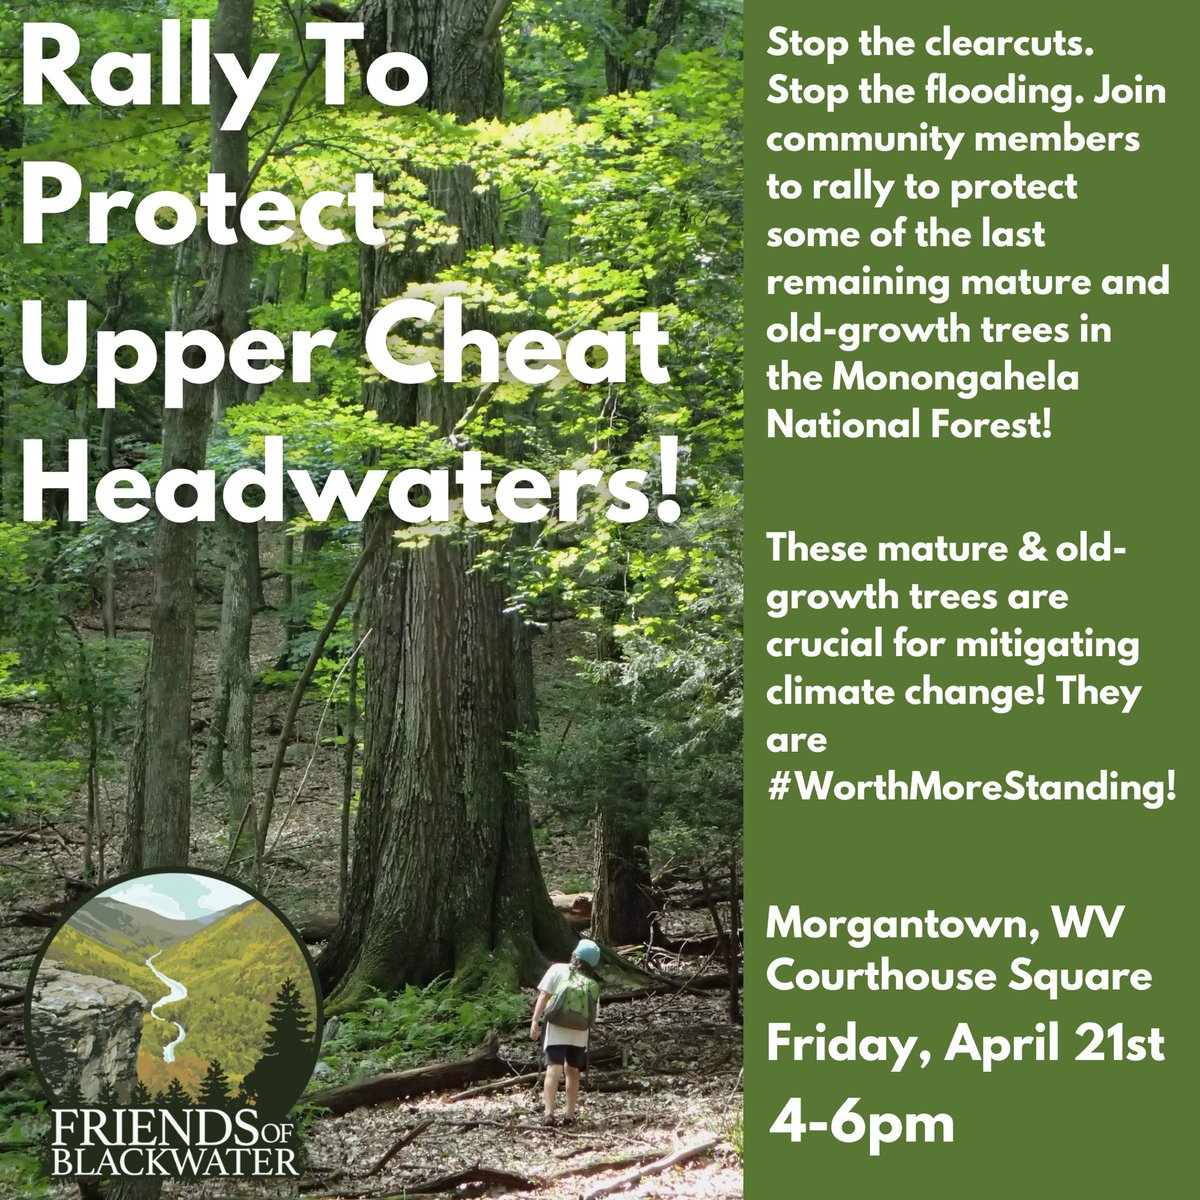 Stop the clearcuts. Stop the flooding. Come out on the 21st to protect the Upper Cheat Headwaters! These #ClimateForests are #WorthMoreStanding !